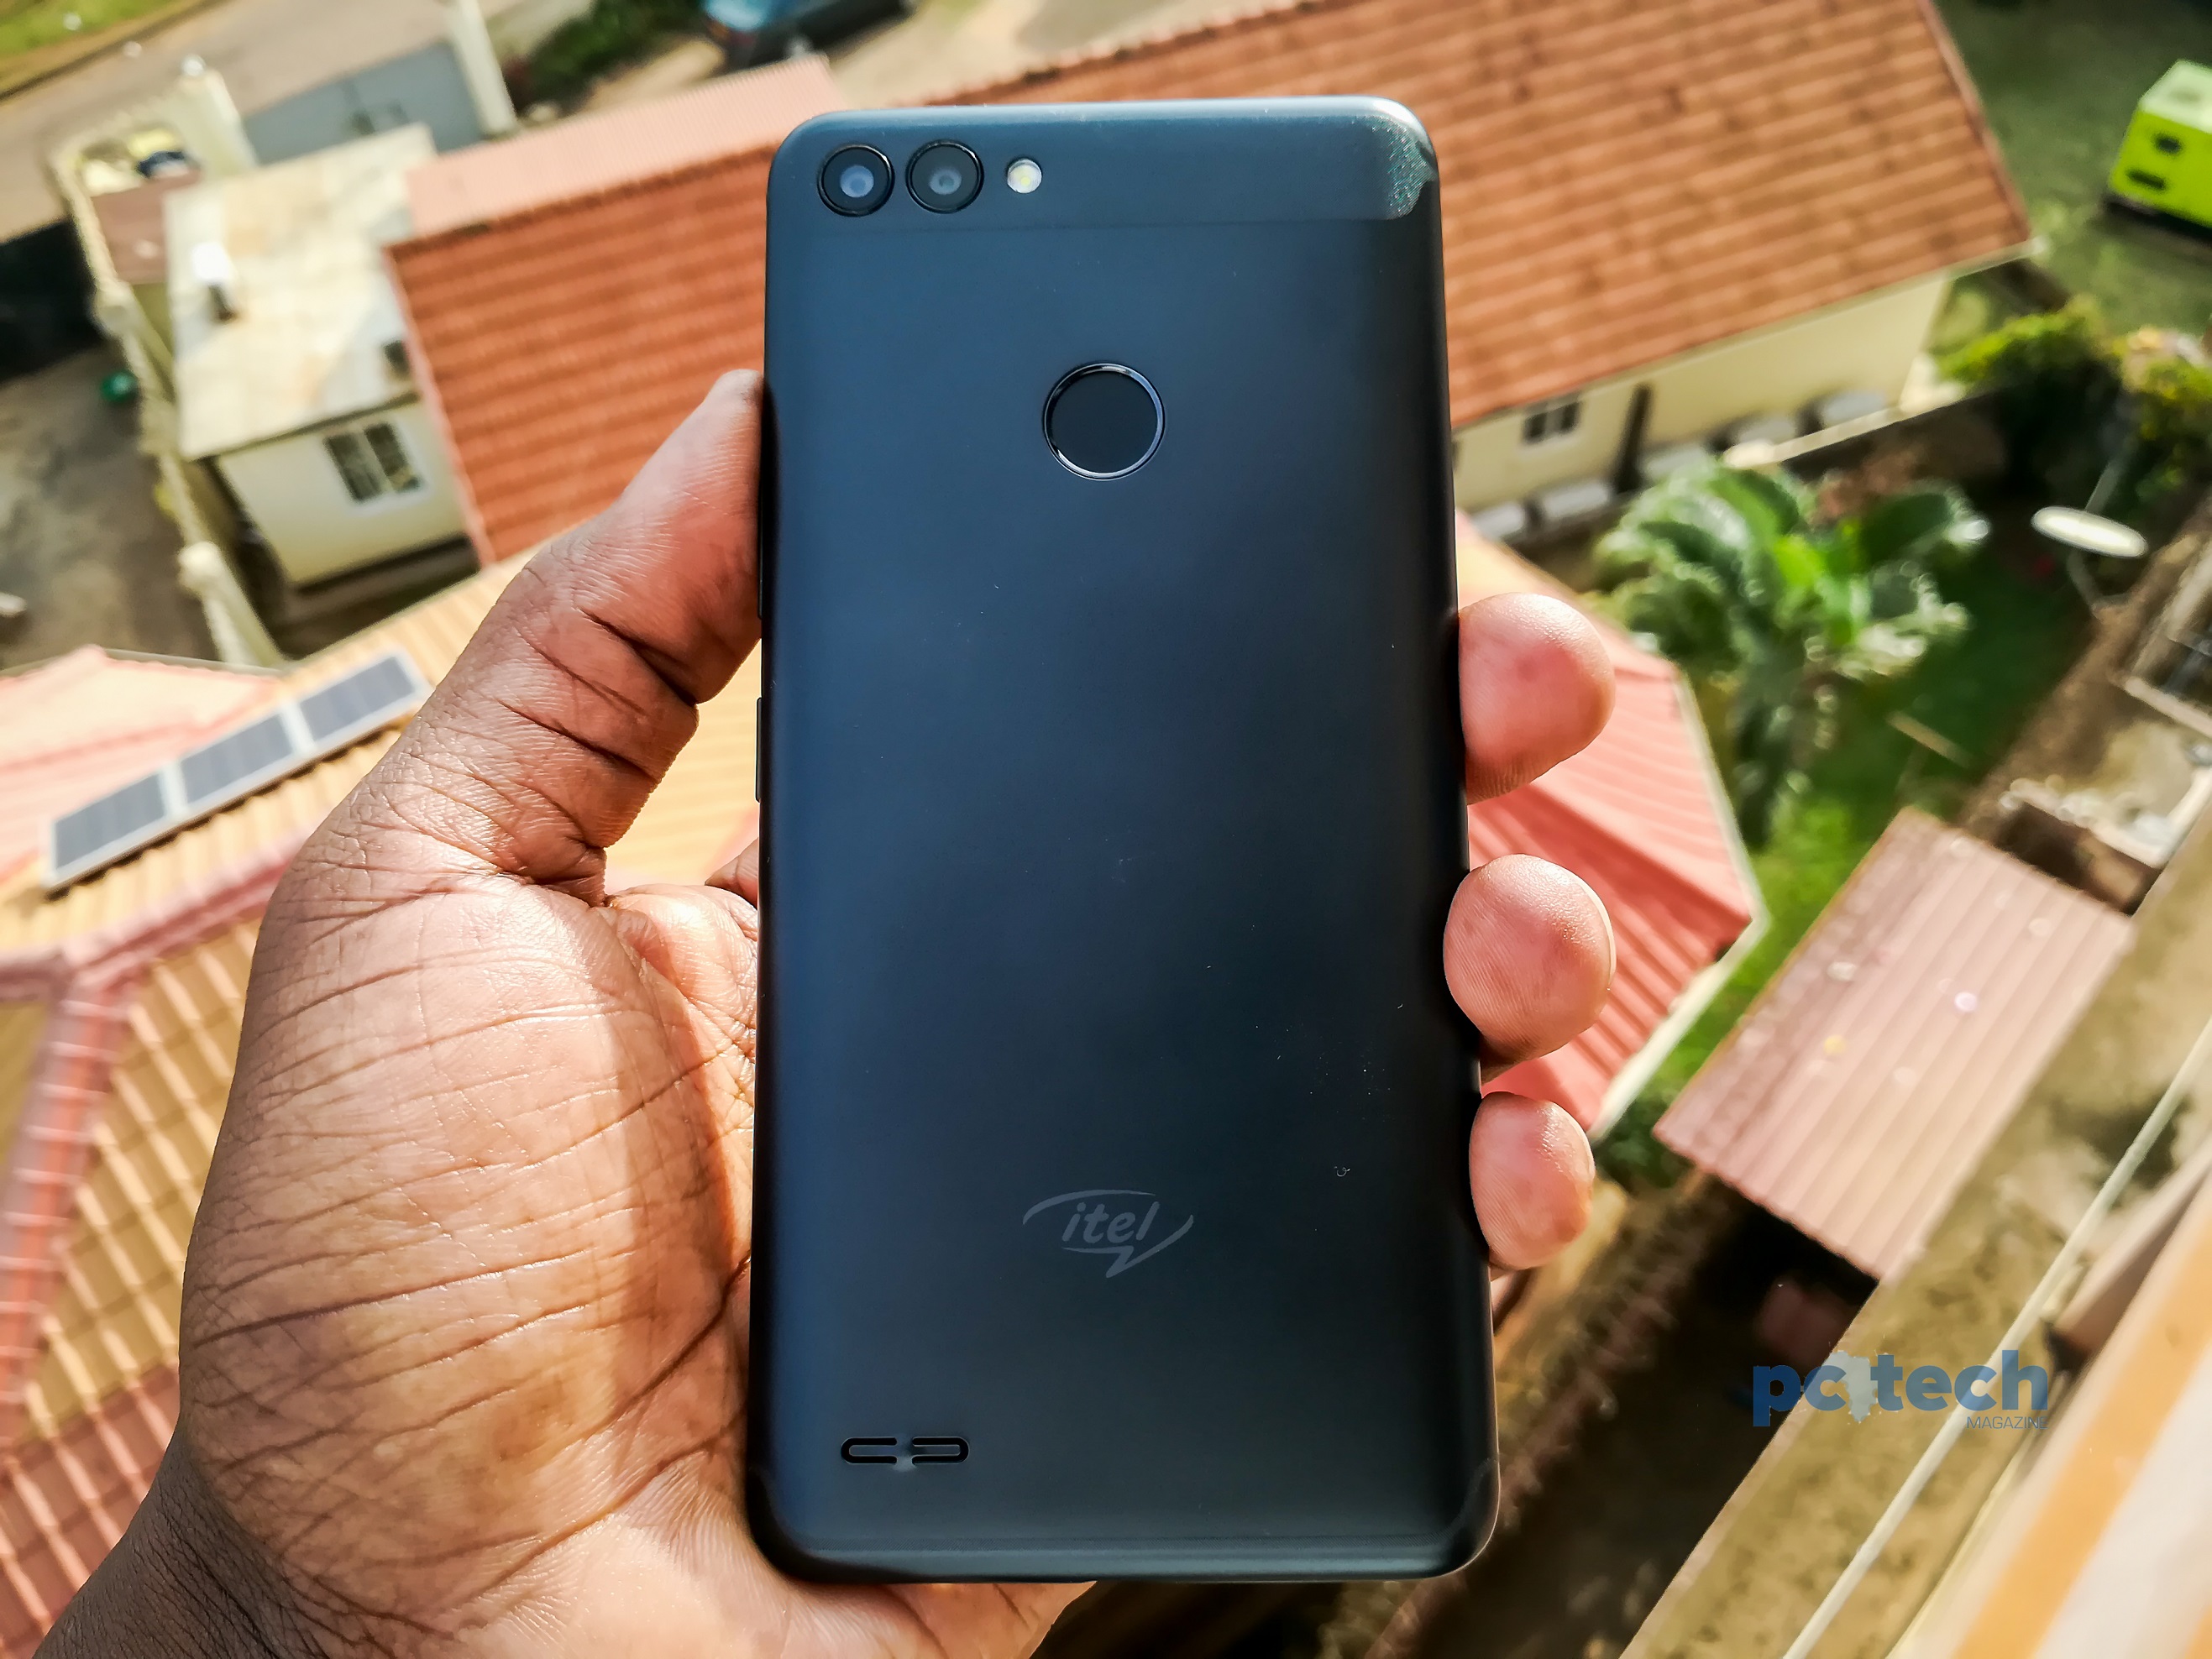 The itel S13 is the newest flagship smartphone from itel Mobiles and succeeds itel S12. Has been priced at UGX290,000 in the Ugandan market.